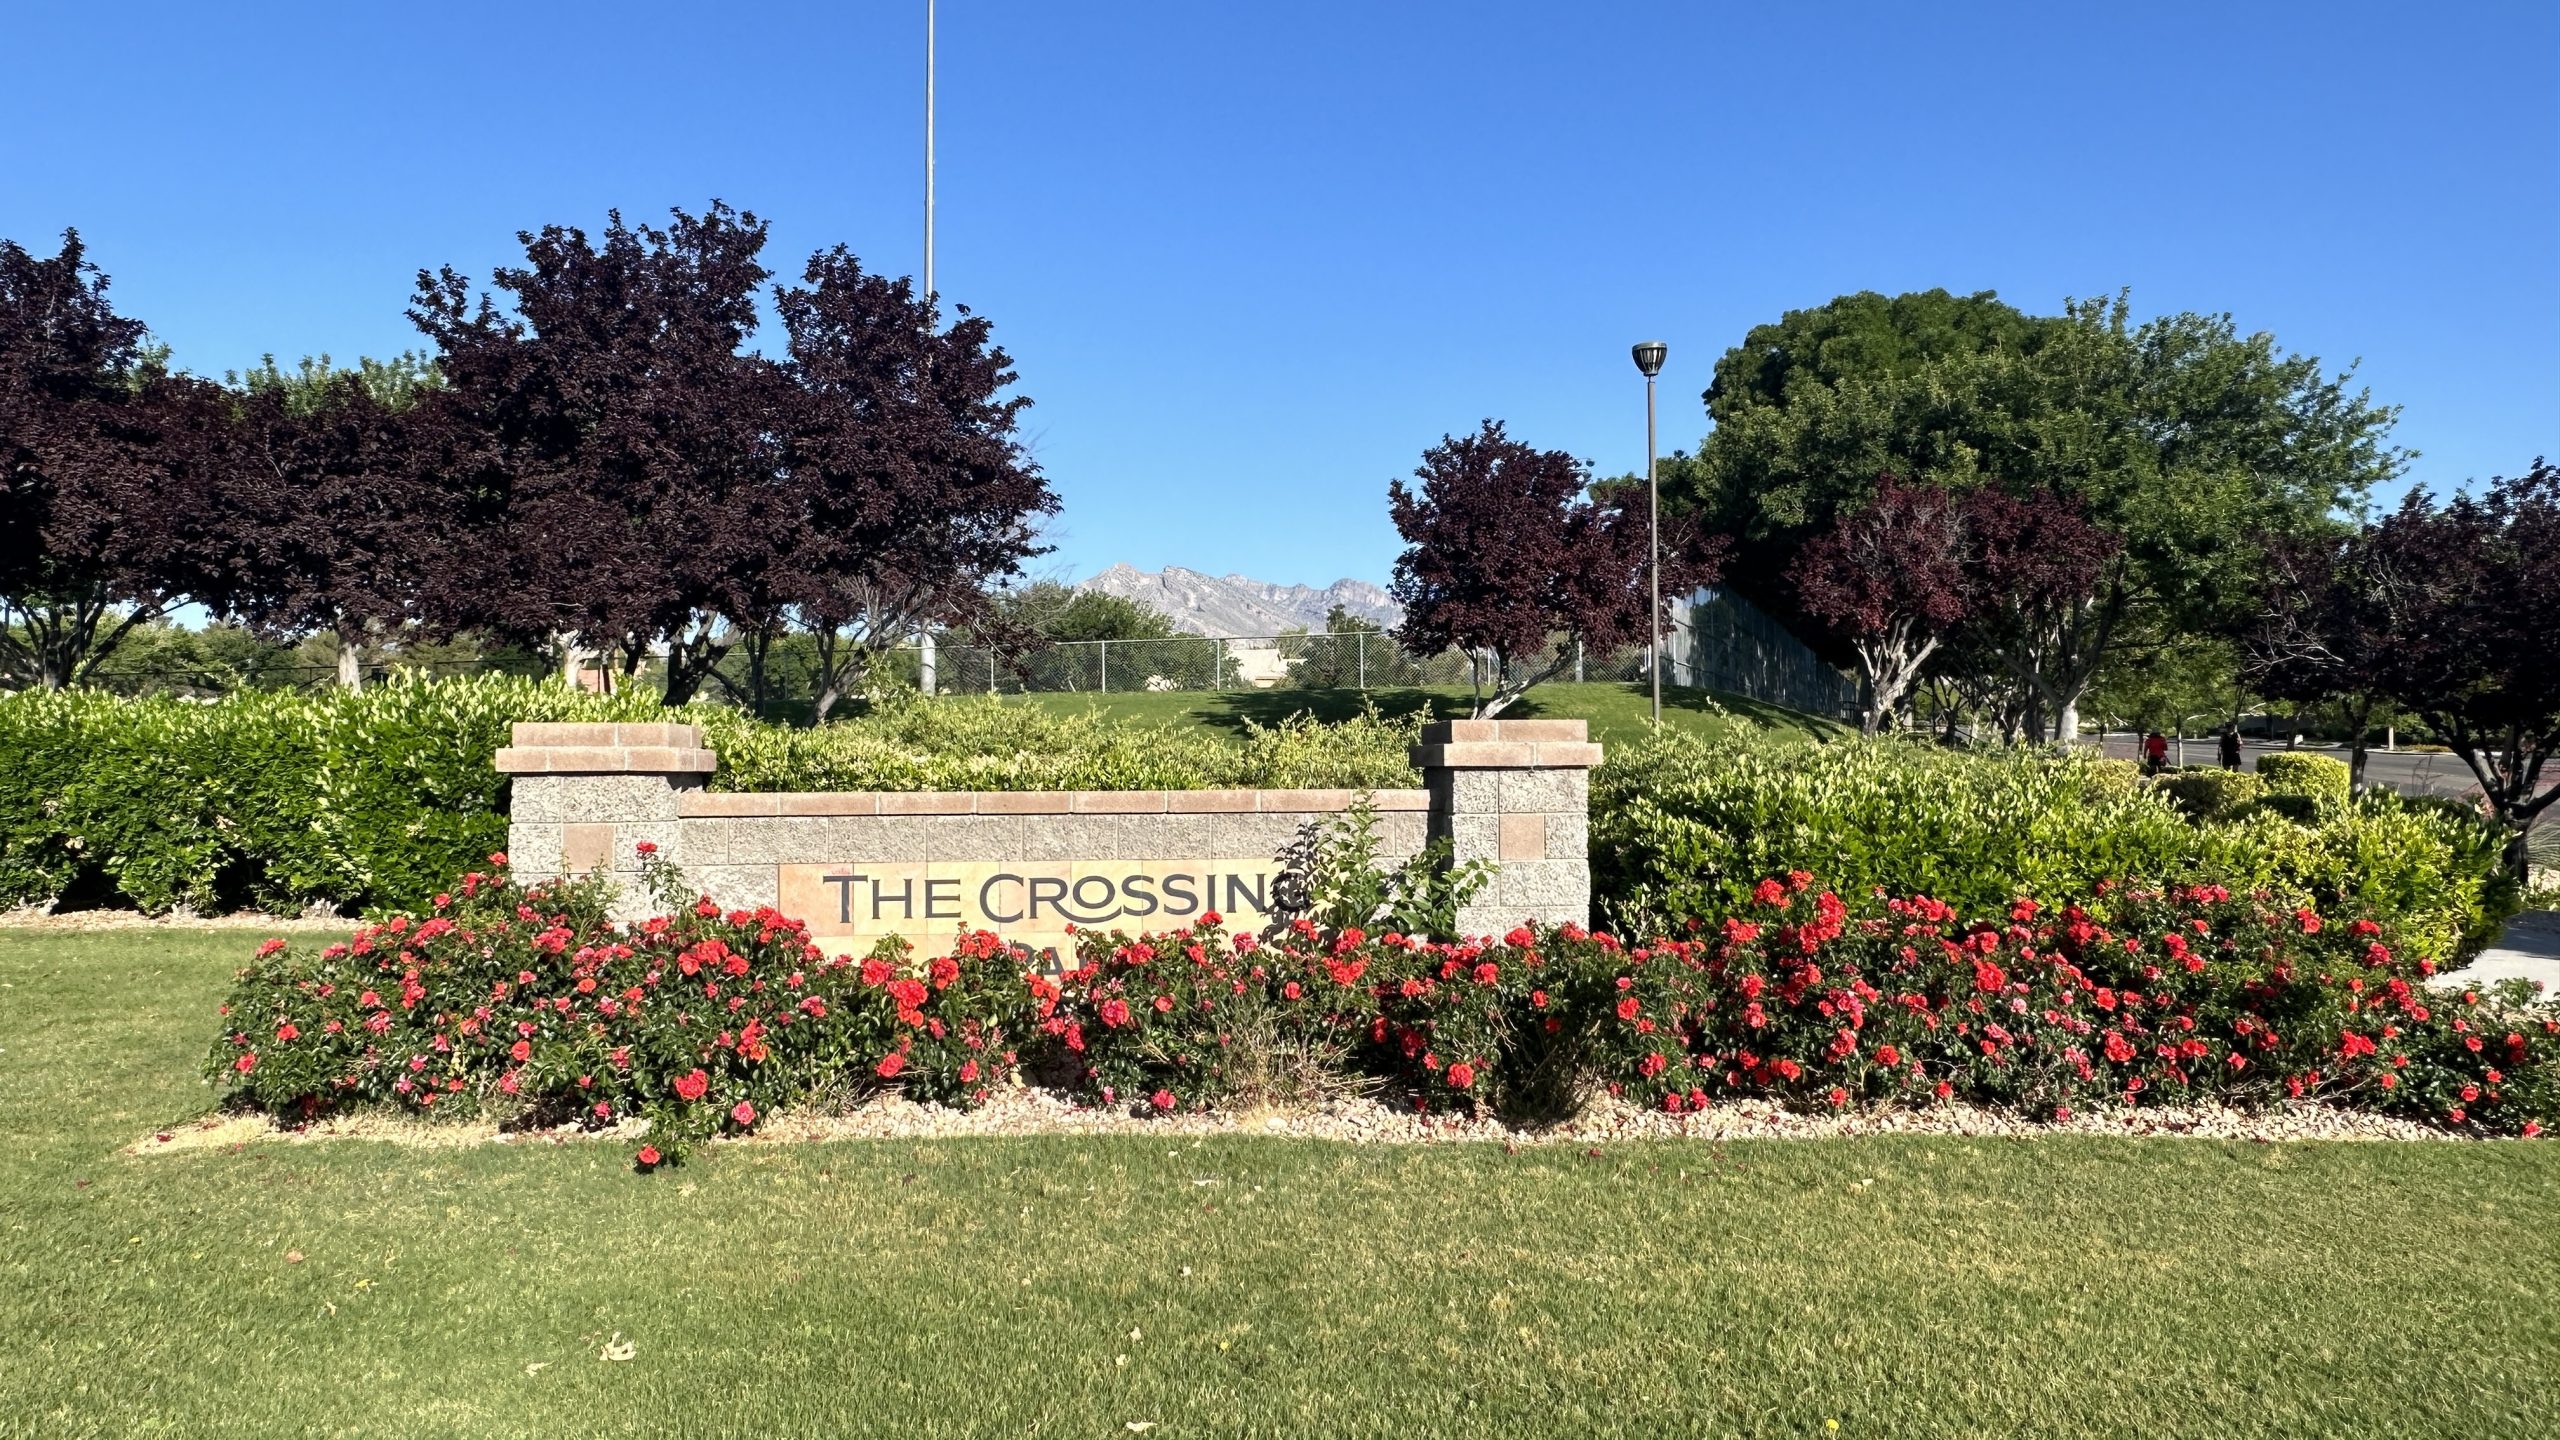 The Crossing Park